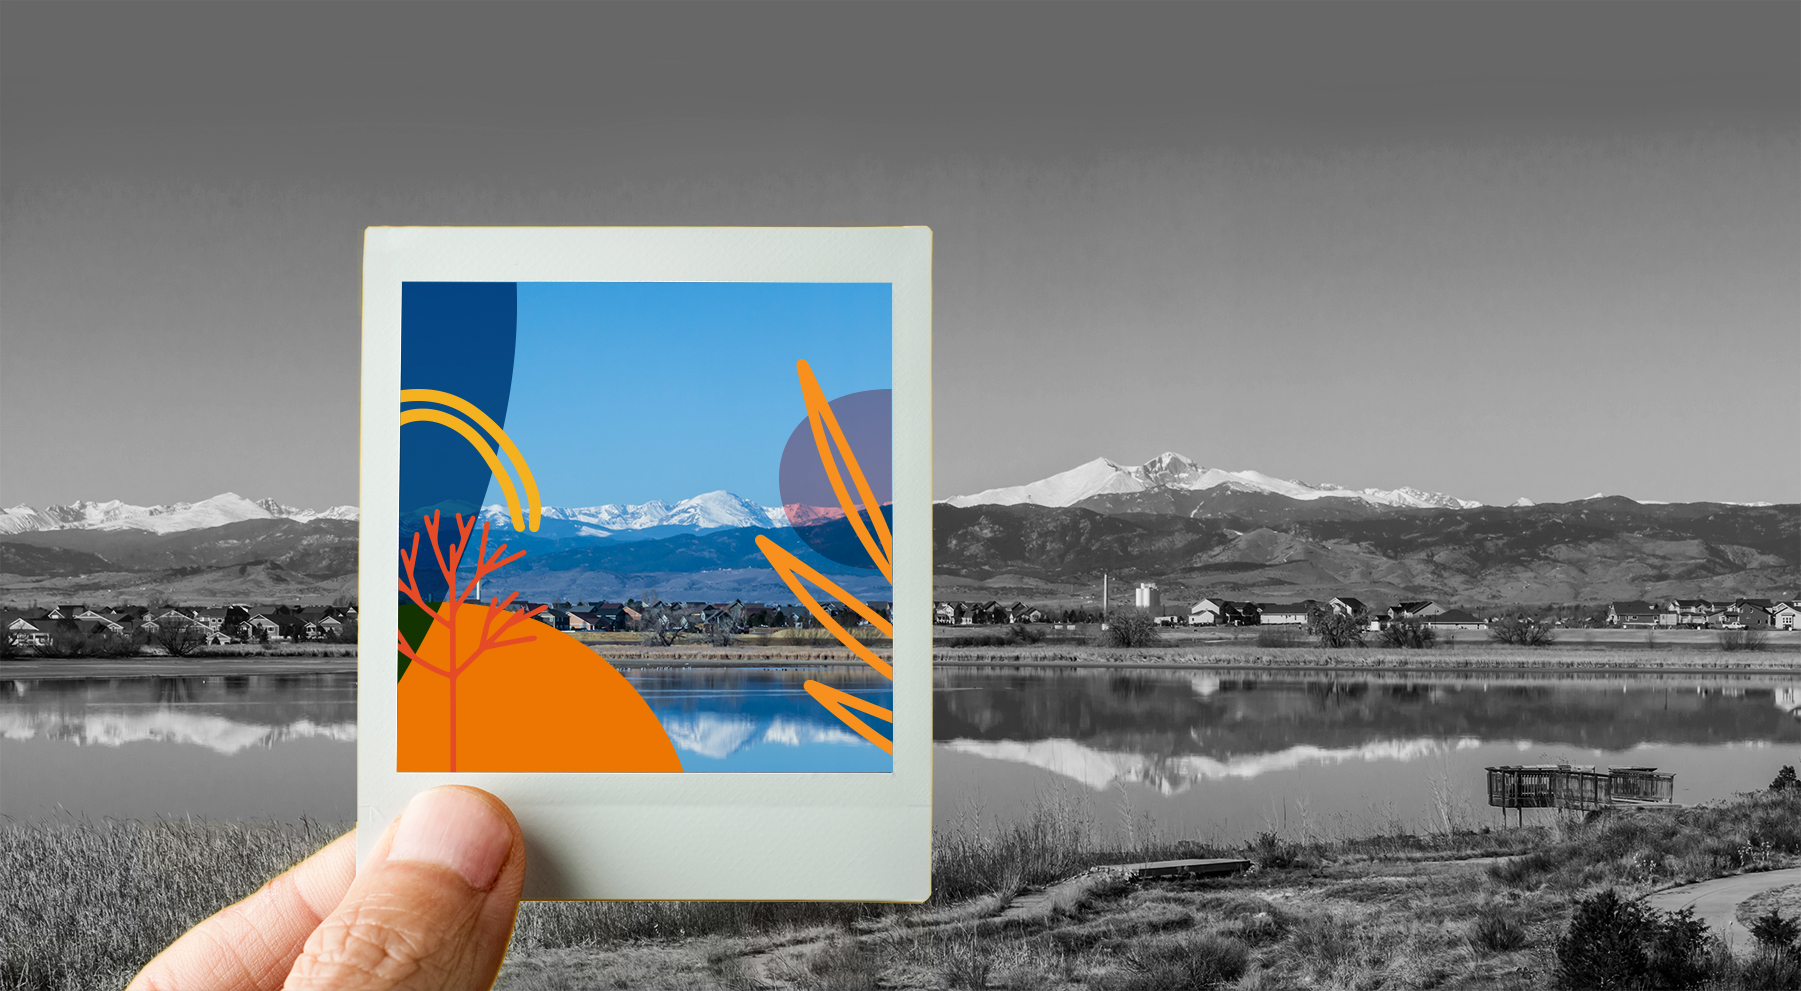 Image of a polaroid picture of mountains being held over an image of mountains